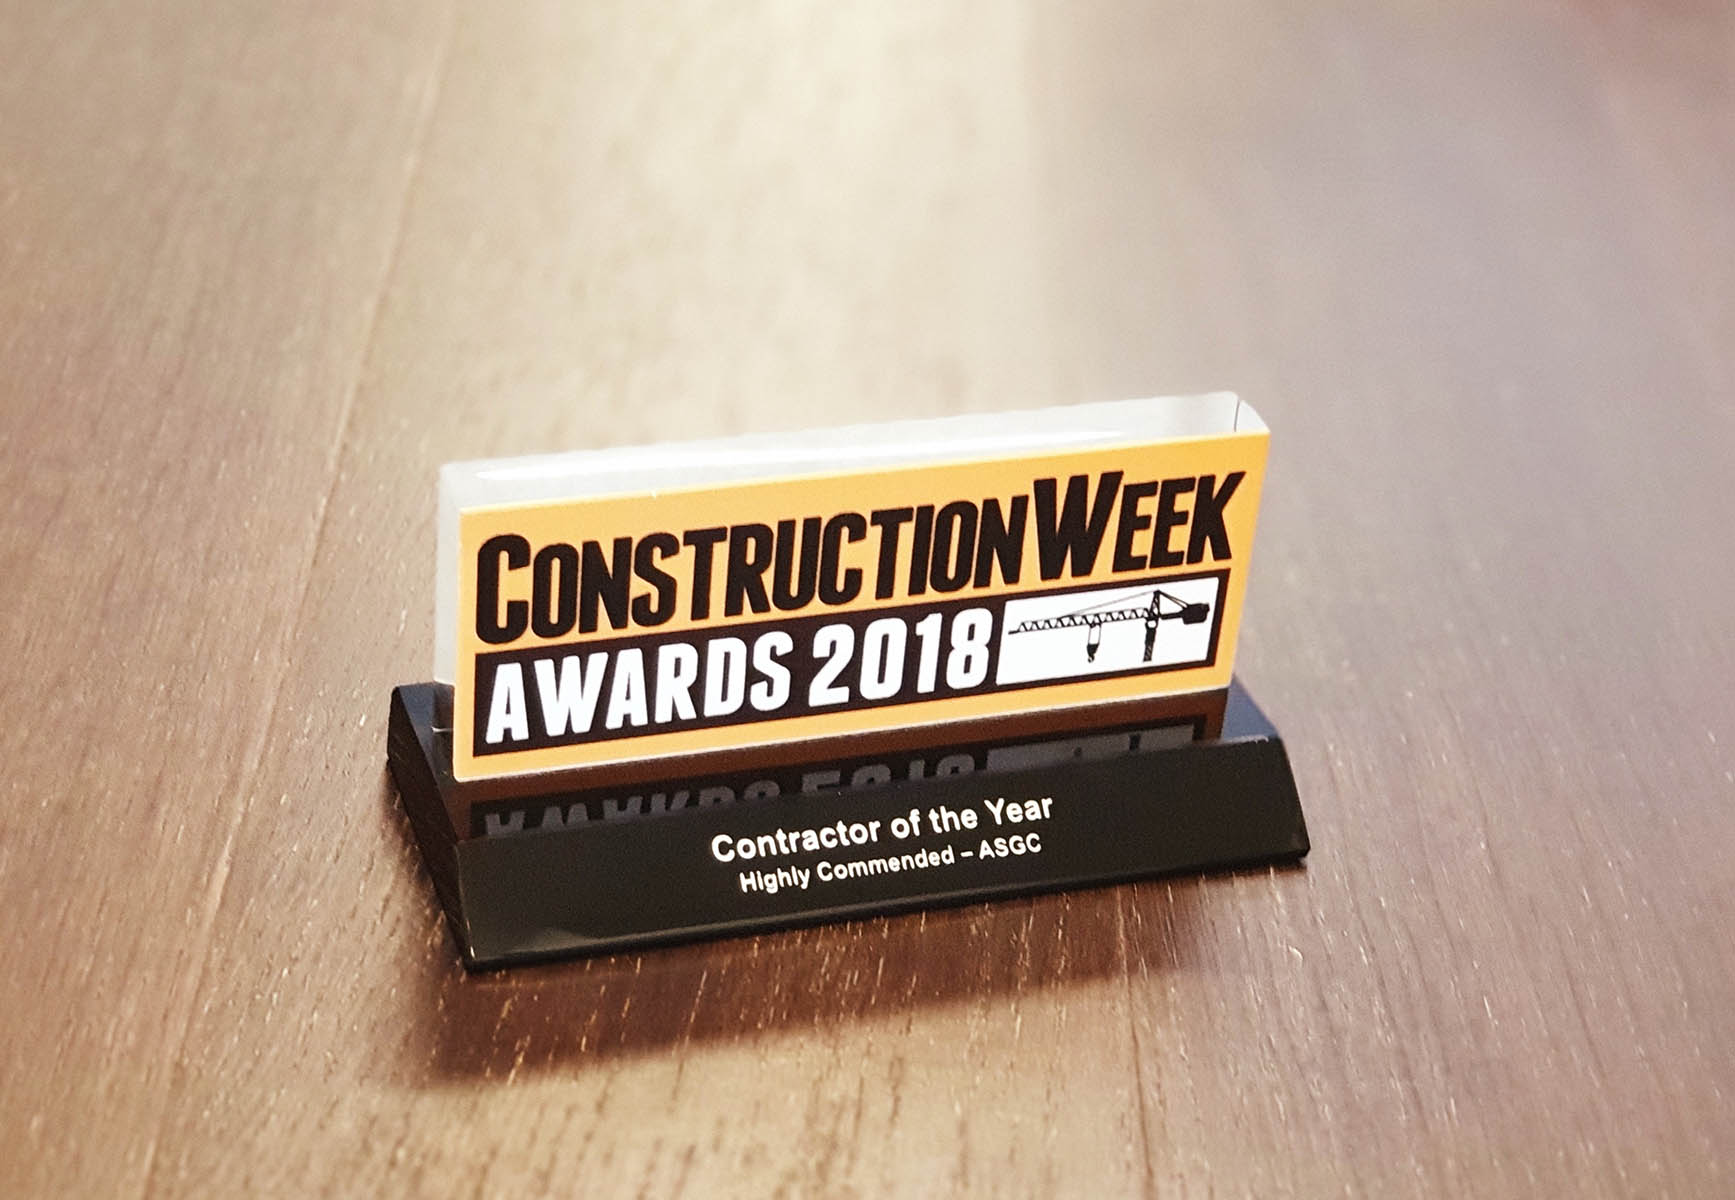 Contractor of the Year 2018 Highly Commended by Construction Week